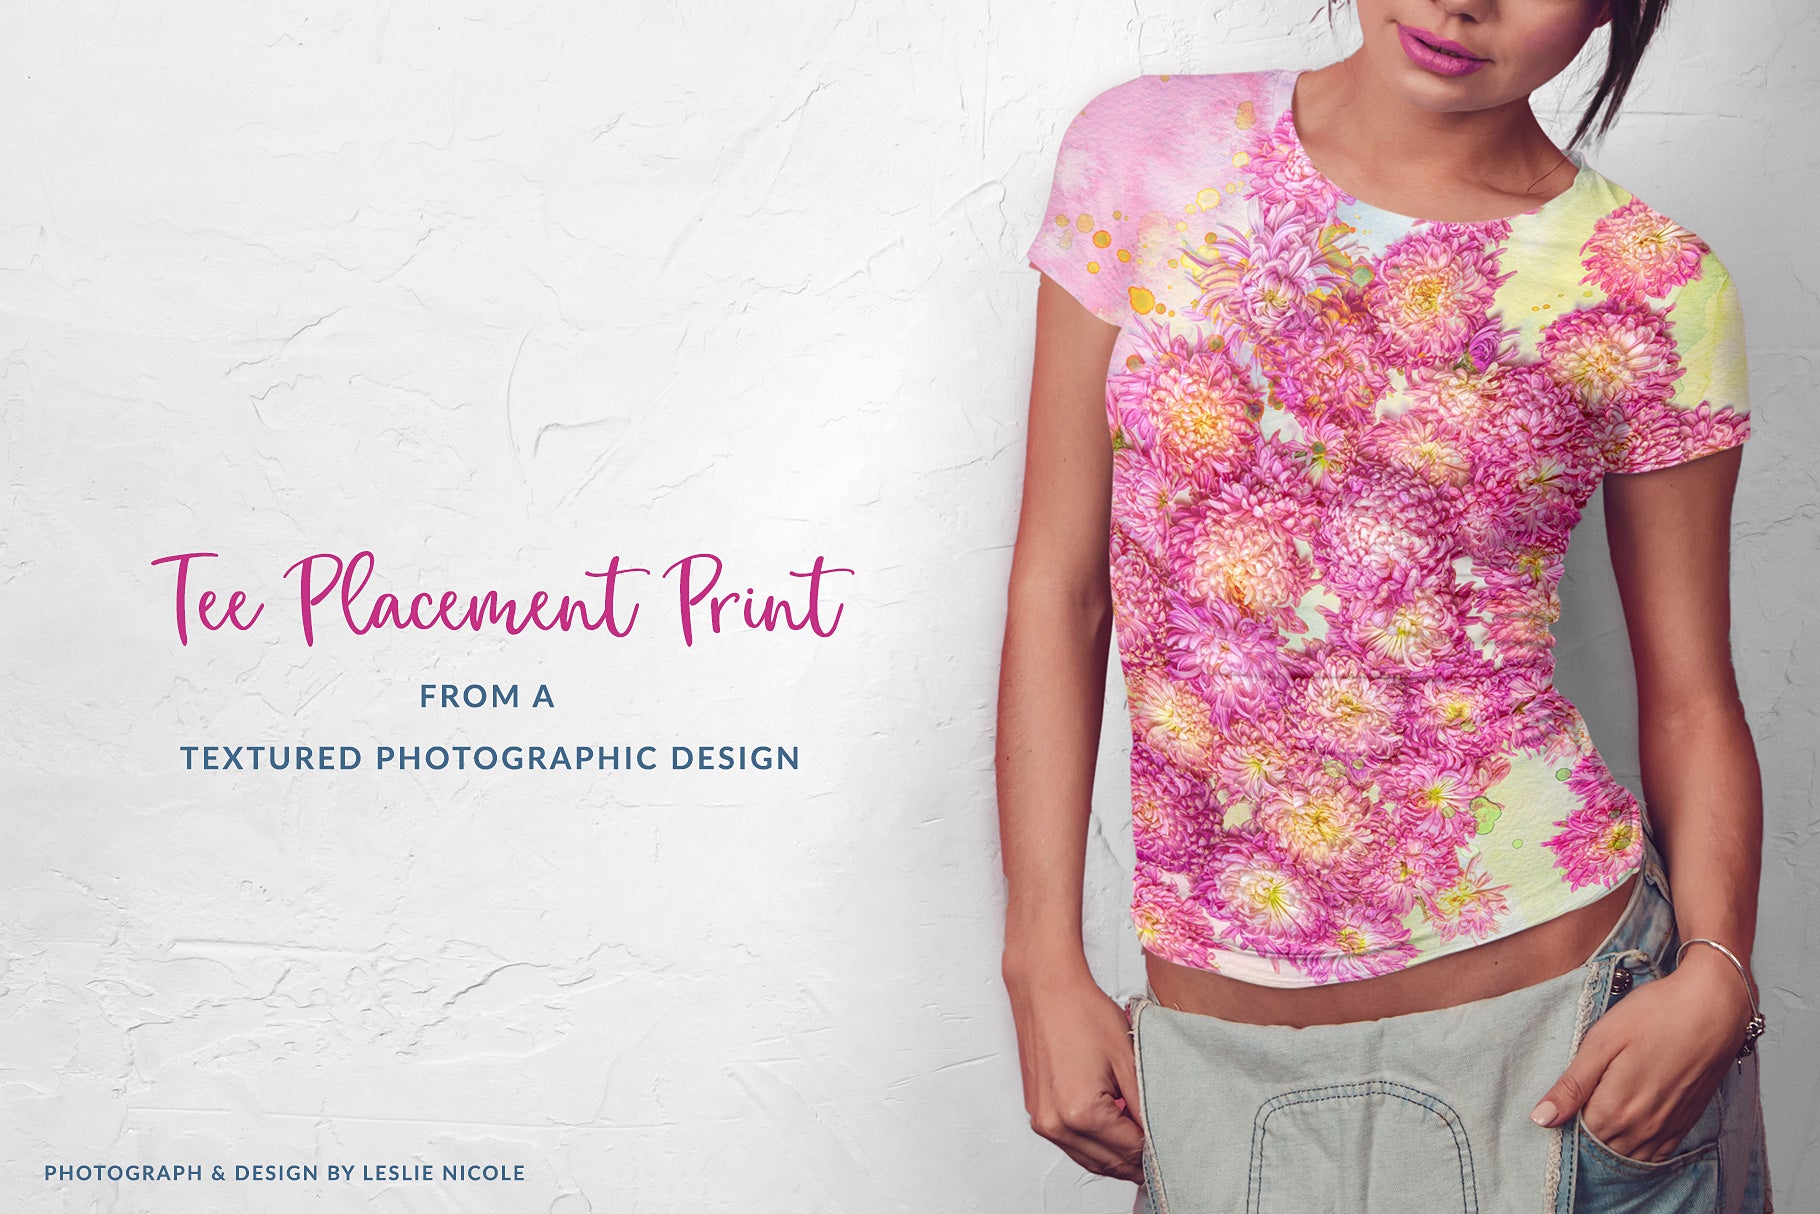 Photographic floral design for a tee using a free watercolor texture.